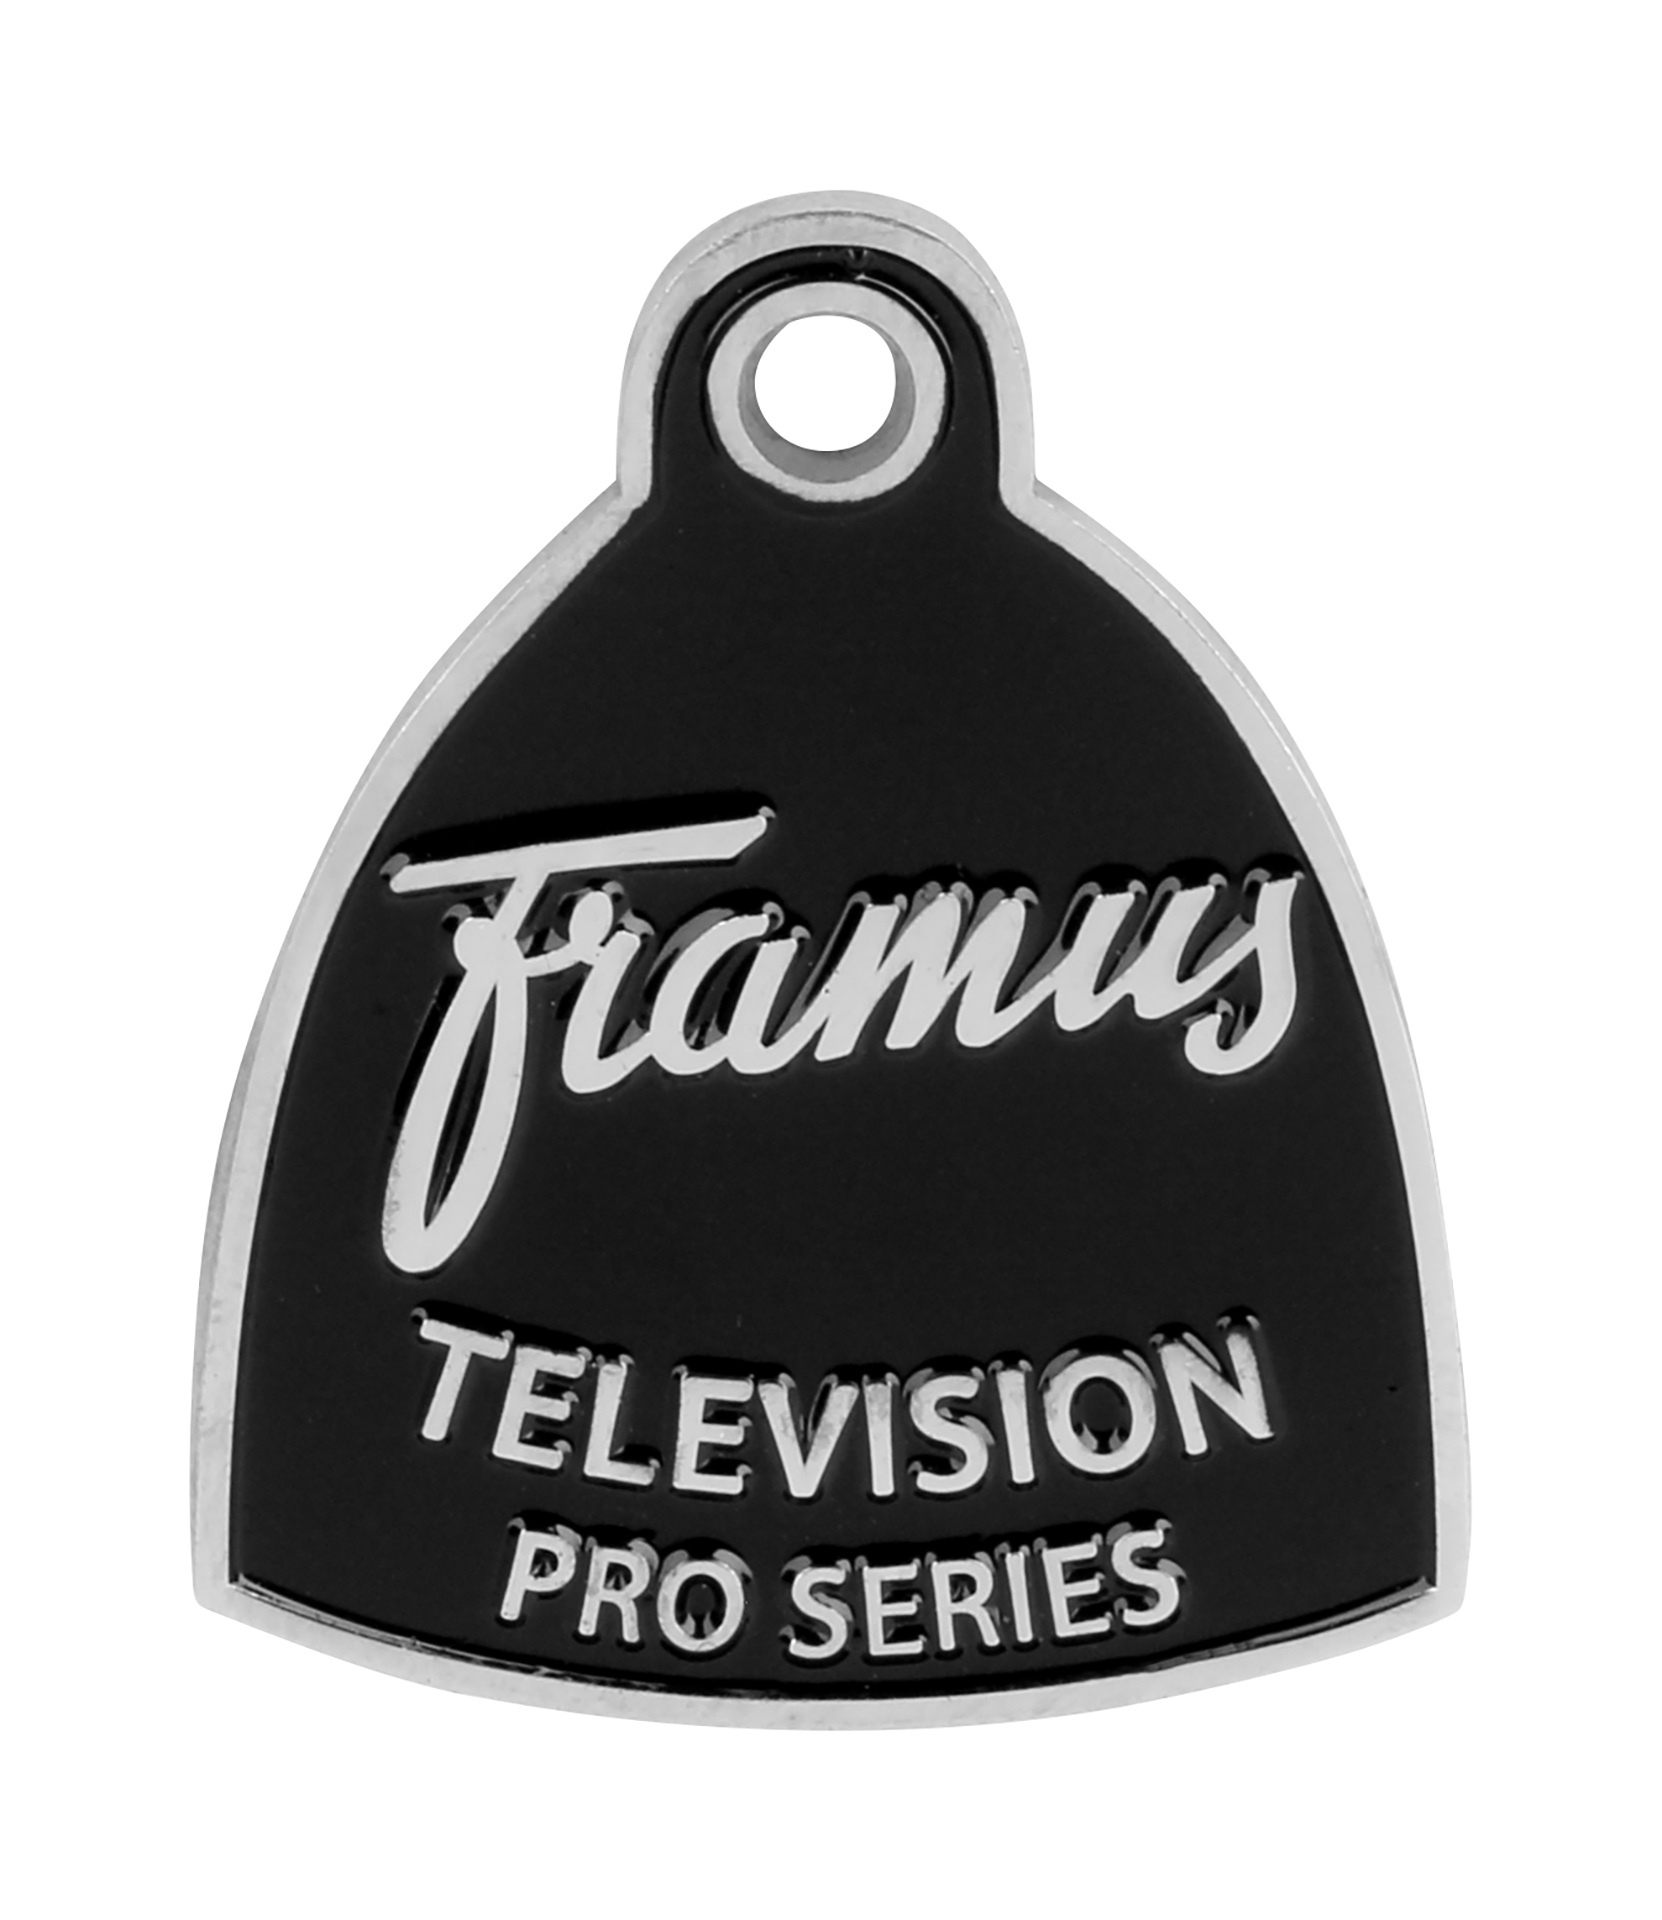 Trussrodcover Framus Pro Series Television